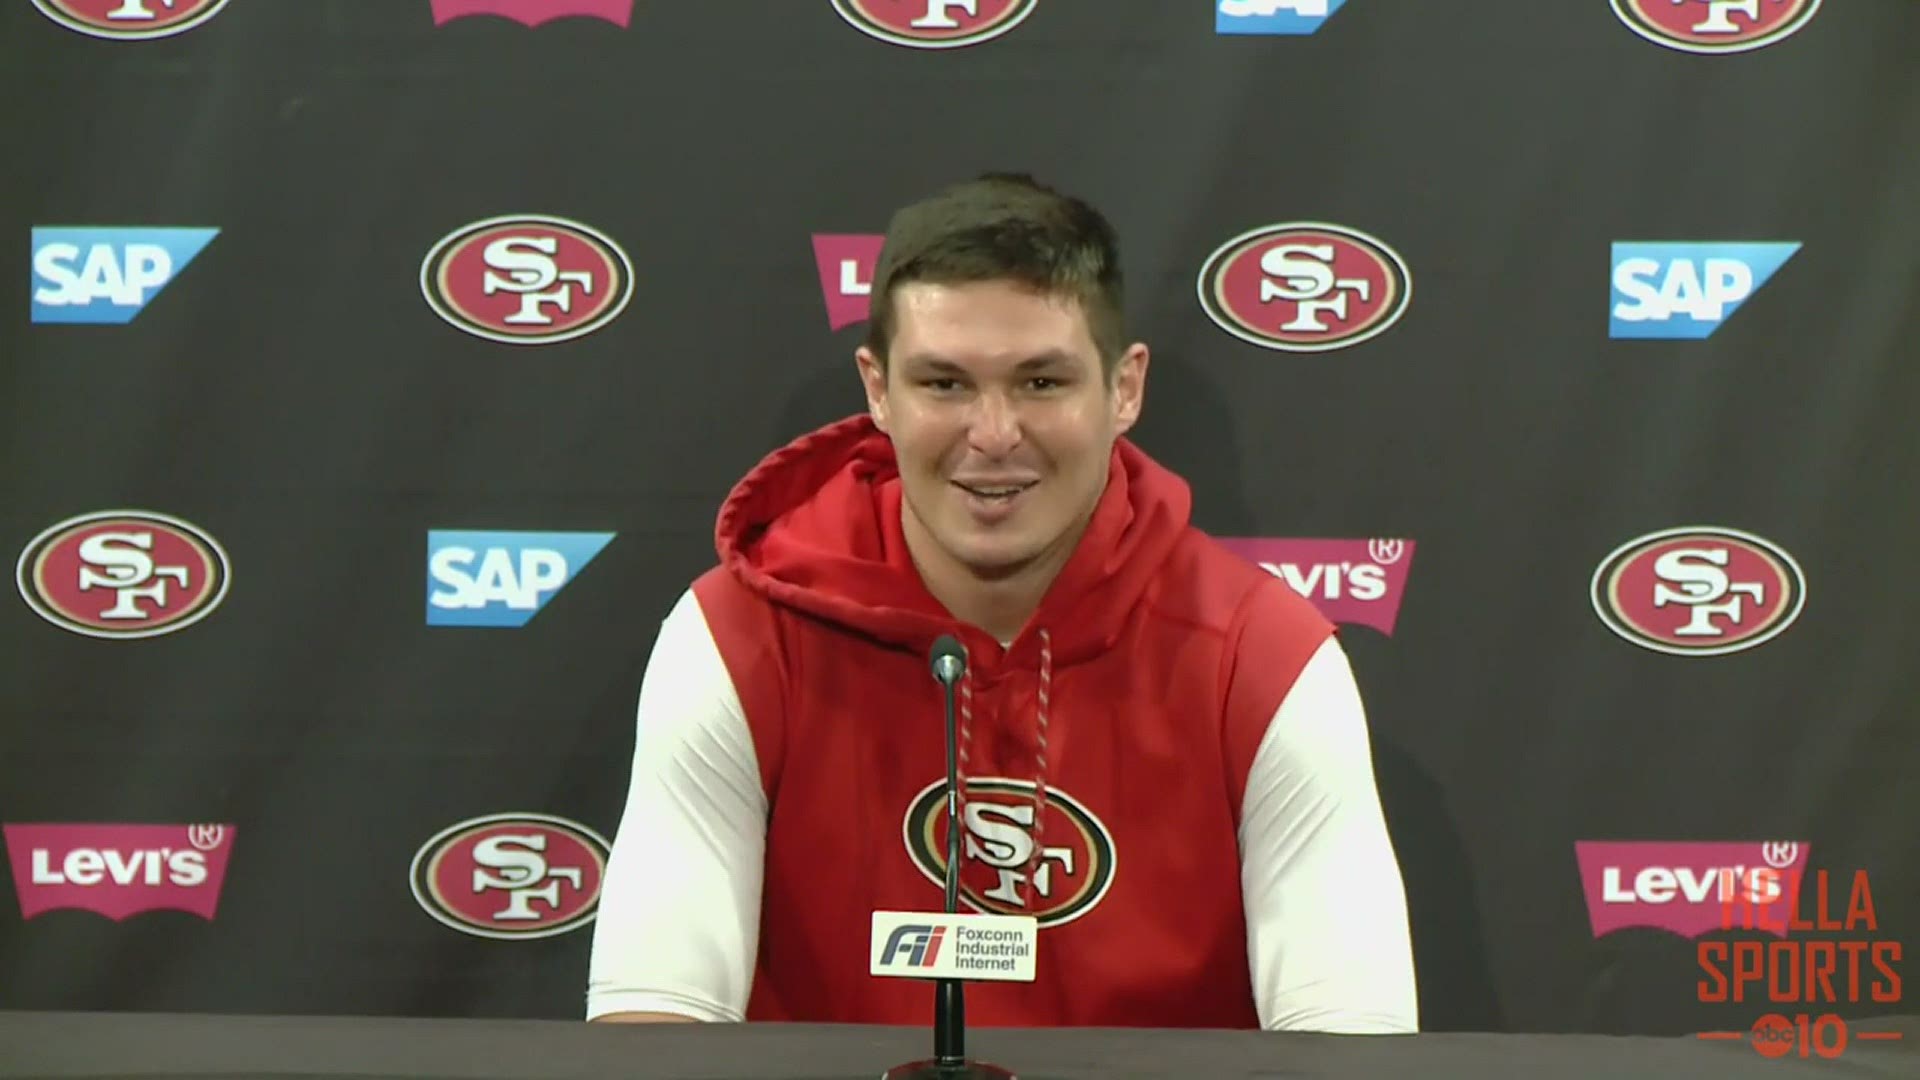 49ers quarterback Nick Mullens talks about filling in for injured starter Jimmy Garoppolo for the second consecutive week, when they host the Eagles on Sunday night.